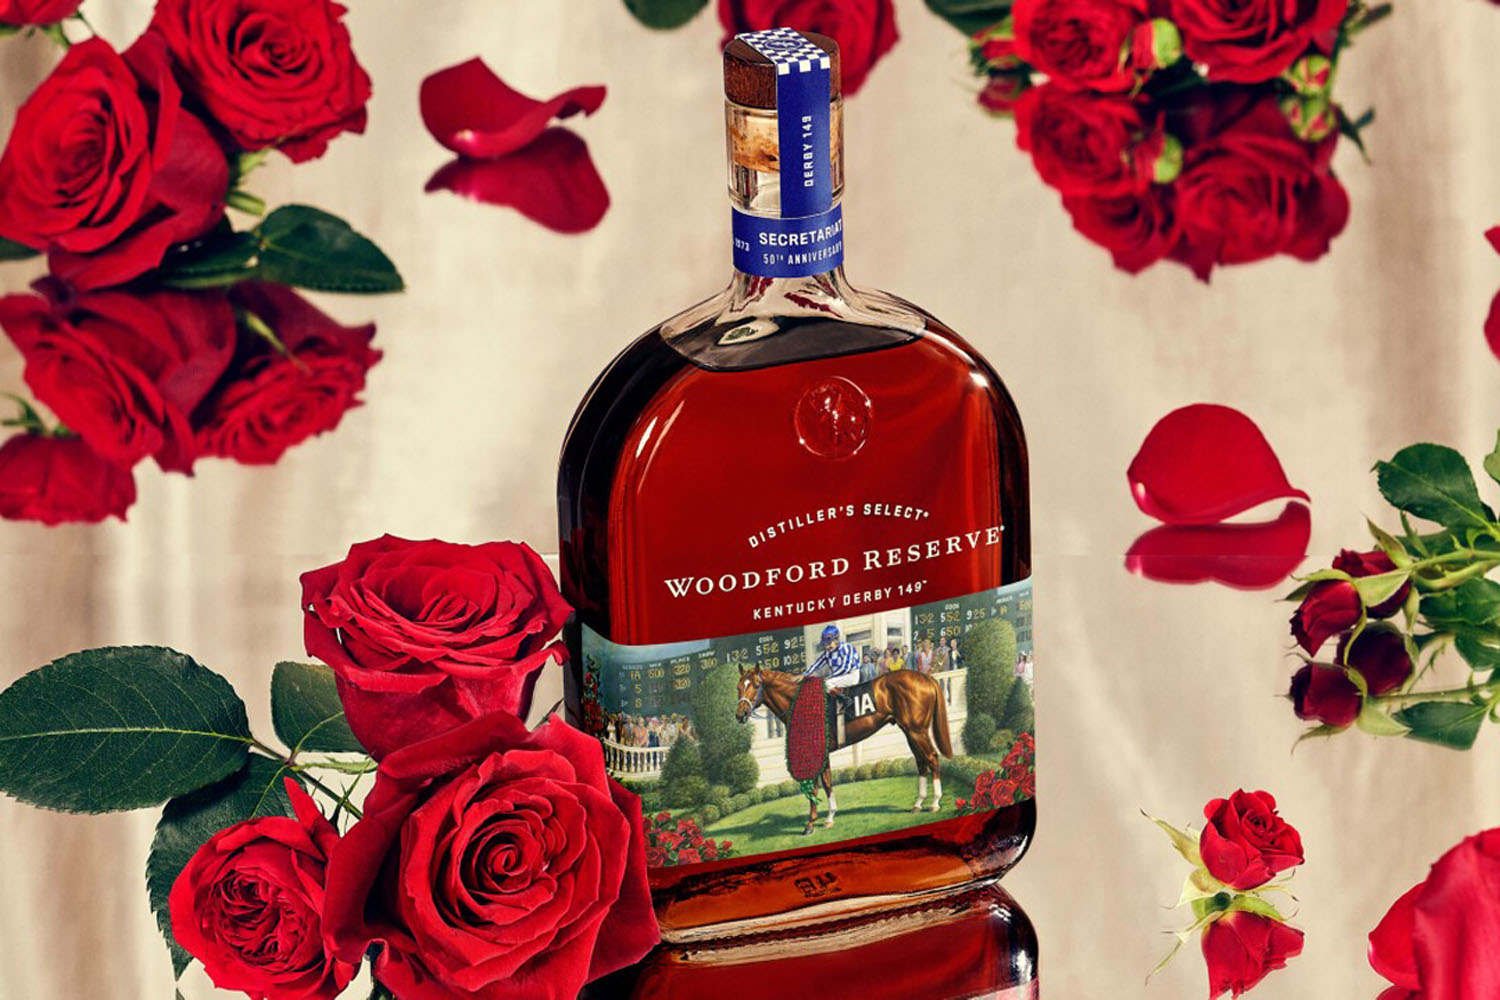 a photo of thew new Woodford Reserve bottle against a flower background